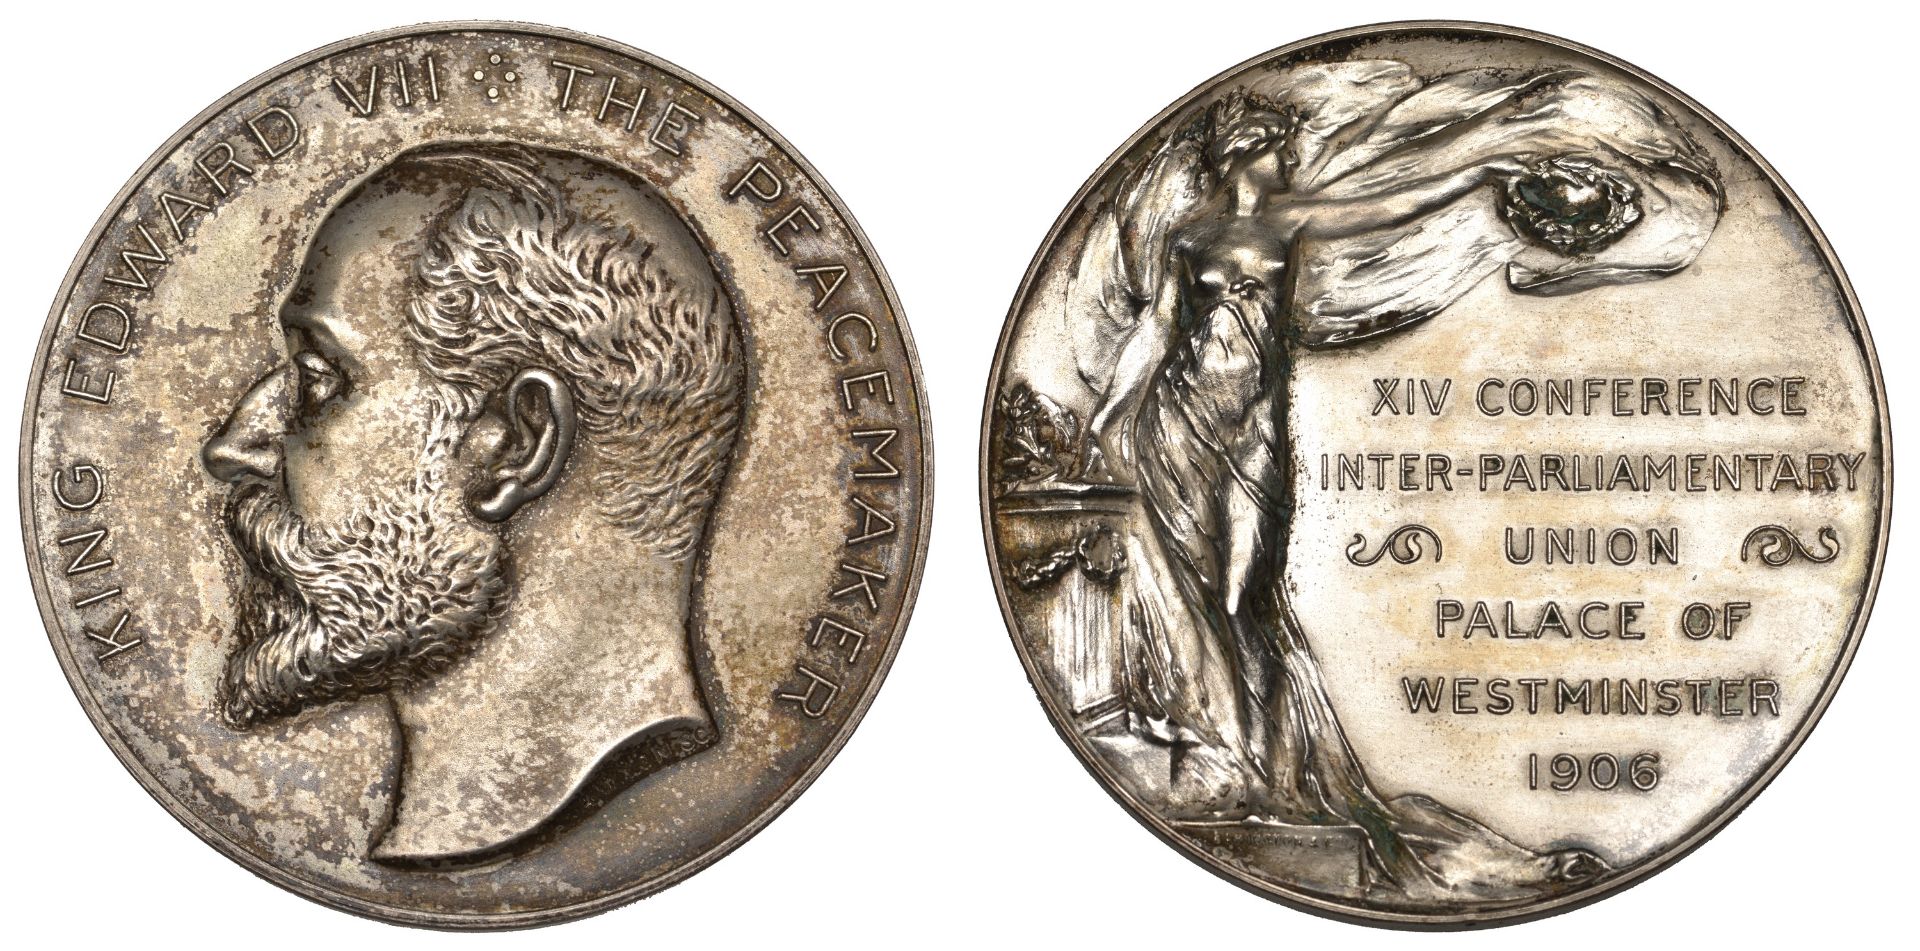 Inter-Parliamentary Conference, London, 1906, a silvered-bronze medal by A. Wyon for Elkingt...